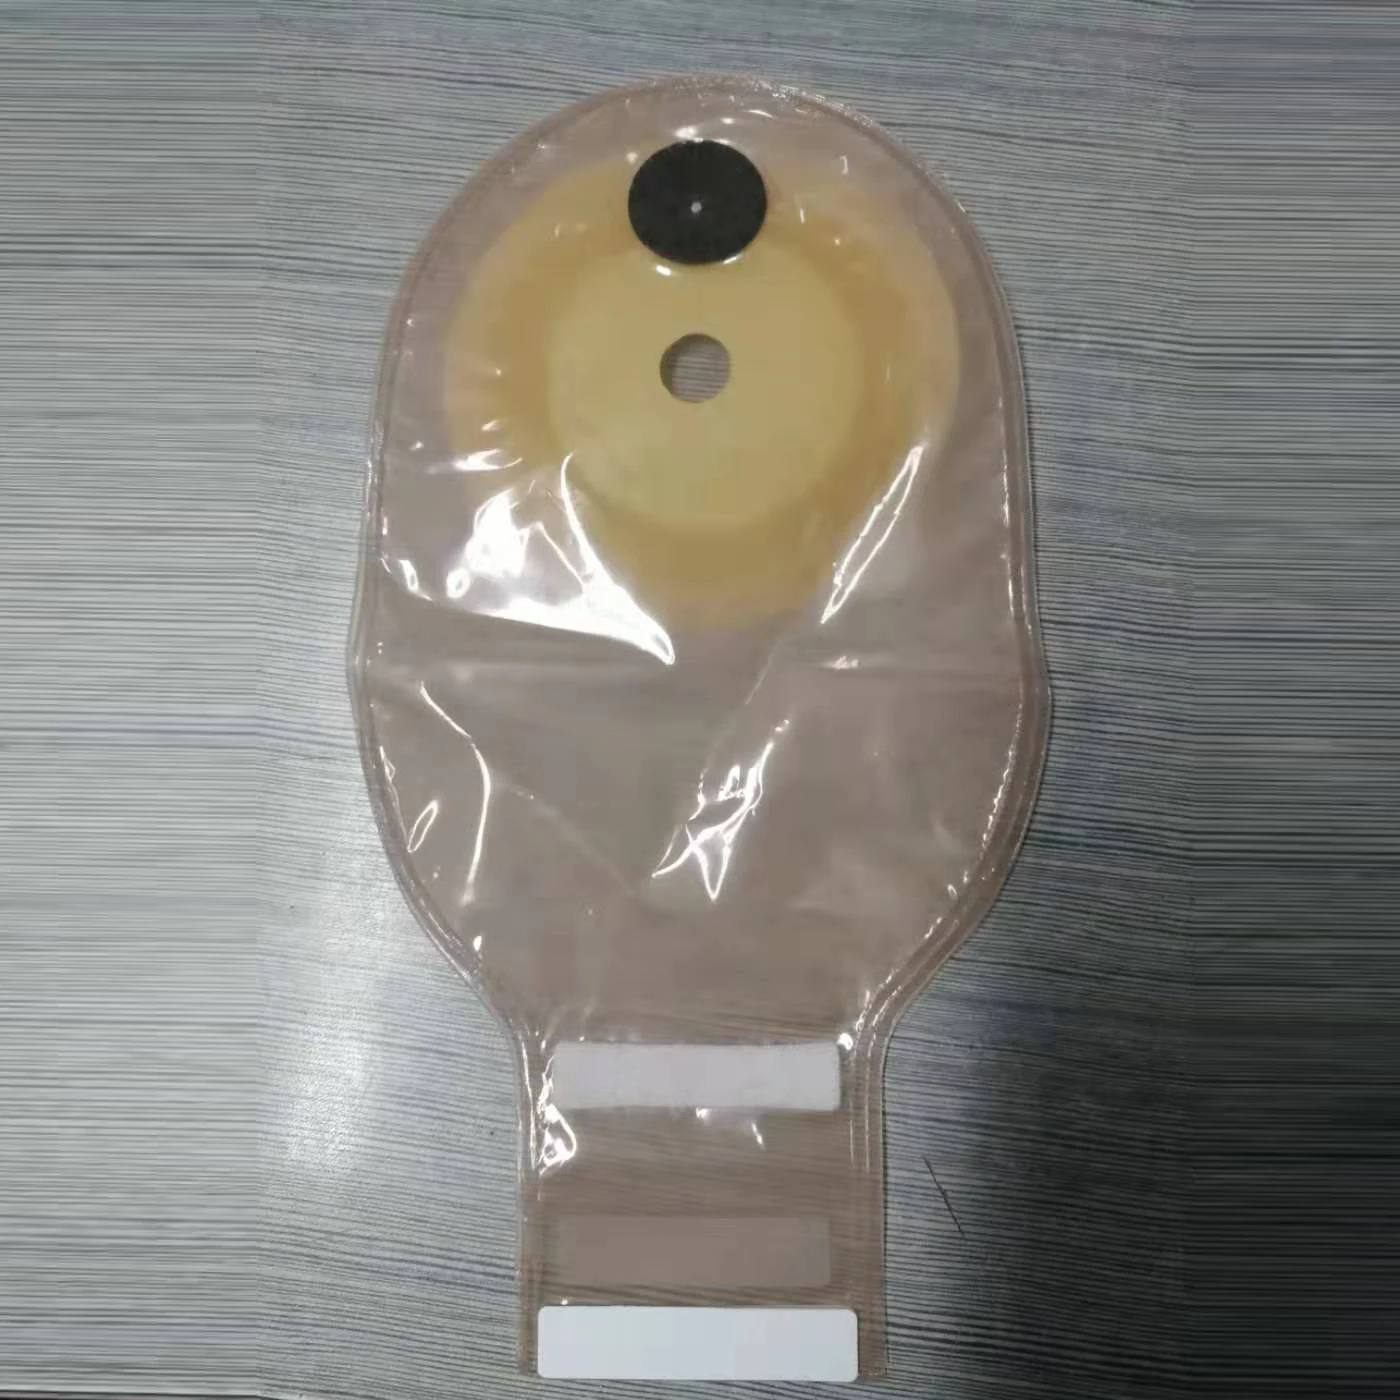 Ostomy Bag Manufacturers Piece Colostomy Bag Protector